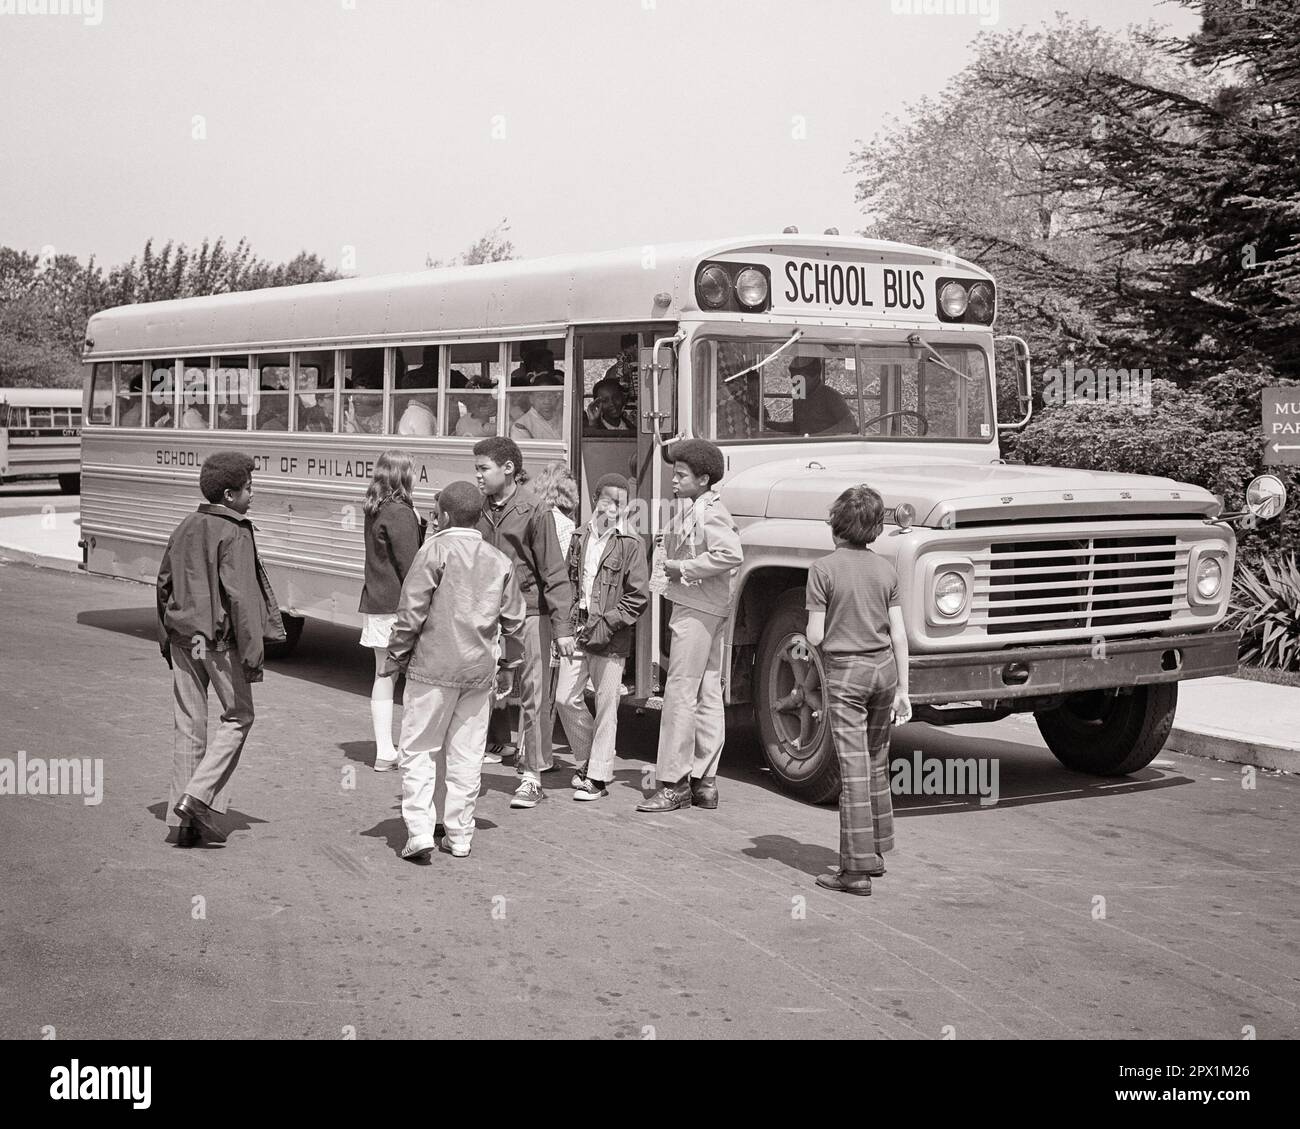 1970s DIVERSE GROUP OF HIGH SCHOOL STUDENTS GETTING ON SCHOOL BUS - s18721 HAR001 HARS COPY SPACE FRIENDSHIP FULL-LENGTH MALES TEENAGE GIRL TEENAGE BOY B&W SADNESS SCHOOLS 8 HAPPINESS ADVENTURE DISCOVERY AFRICAN-AMERICANS AFRICAN-AMERICAN EXCITEMENT KNOWLEDGE BLACK ETHNICITY PRIDE OPPORTUNITY HIGH SCHOOL HIGH SCHOOLS CONNECTION VARIOUS VARIED COOPERATION EIGHT GROWTH JUVENILES BLACK AND WHITE CAUCASIAN ETHNICITY HAR001 OLD FASHIONED AFRICAN AMERICANS Stock Photo